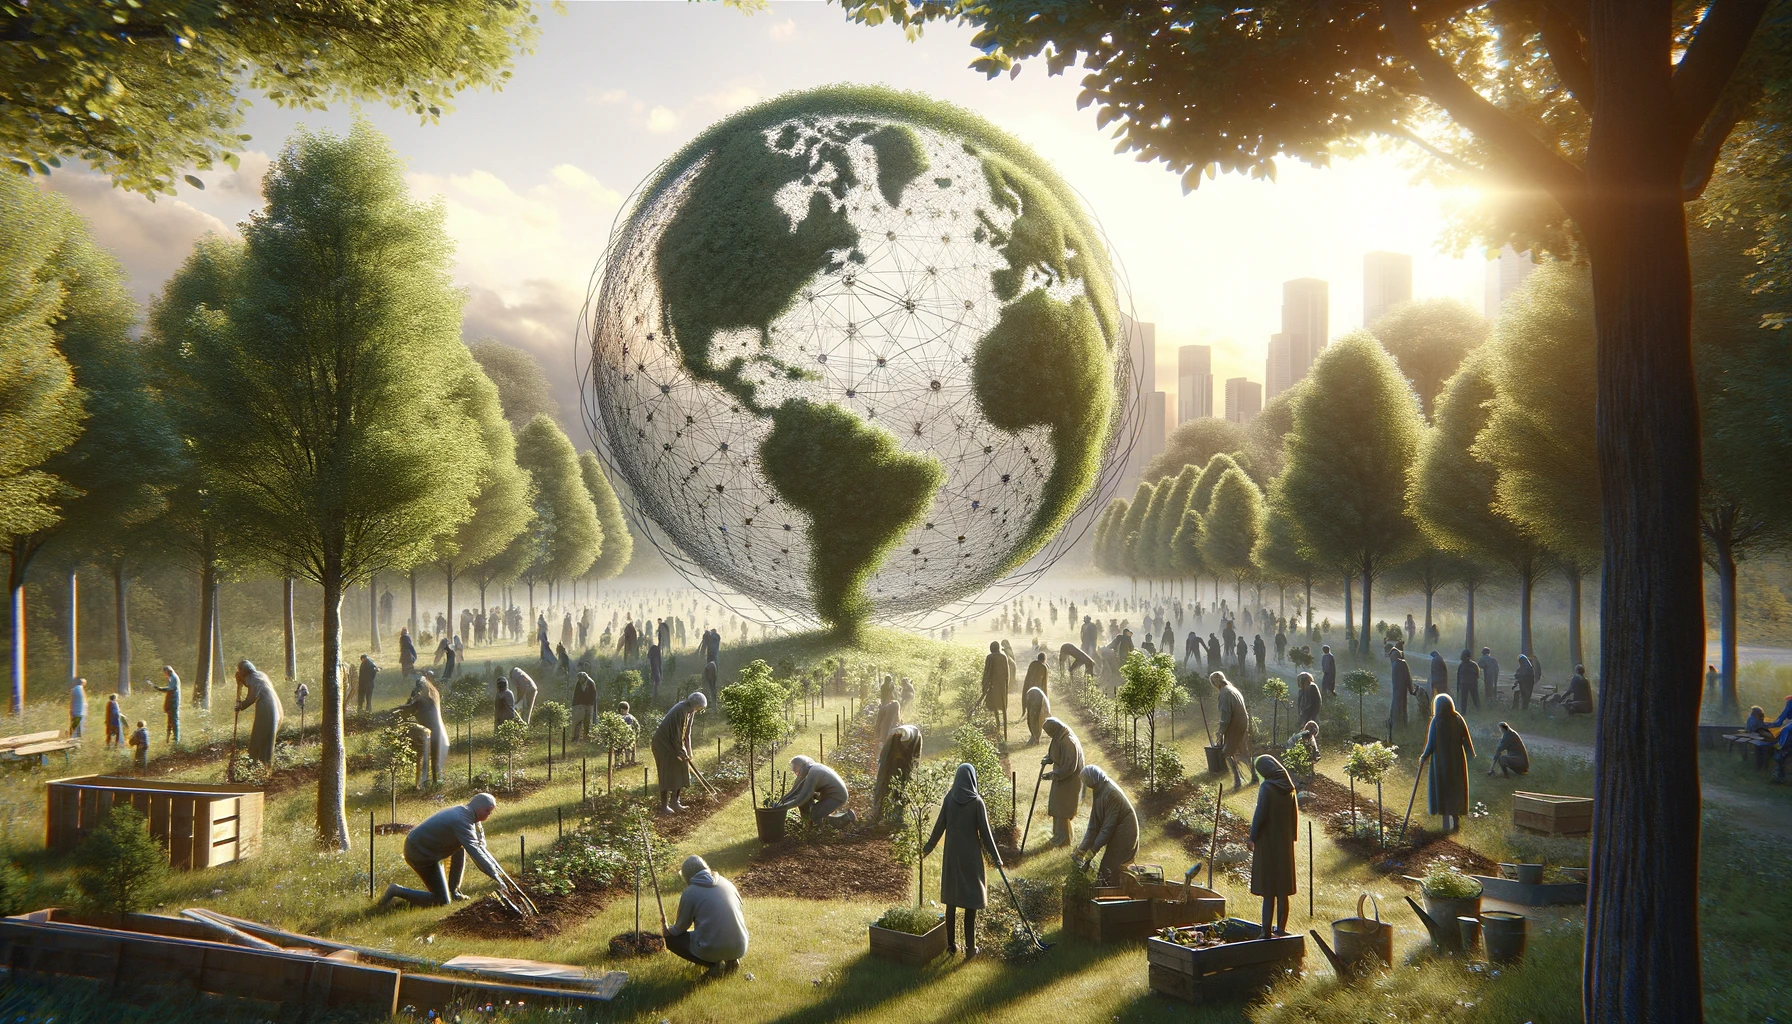 The image portrays a grounded, realistic scene within that visually interprets the concept of natality, inspired by Hannah Arendt. It depicts a community gathering in a park or natural setting, actively participating in planting trees and caring for a garden. This setting symbolizes the principle of natality through the act of nurturing new life and the collaborative effort to foster growth and renewal. The scene embodies the essence of natality as the capacity for continuous human existence, highlighting practical actions that contribute to the creation of a hopeful future.